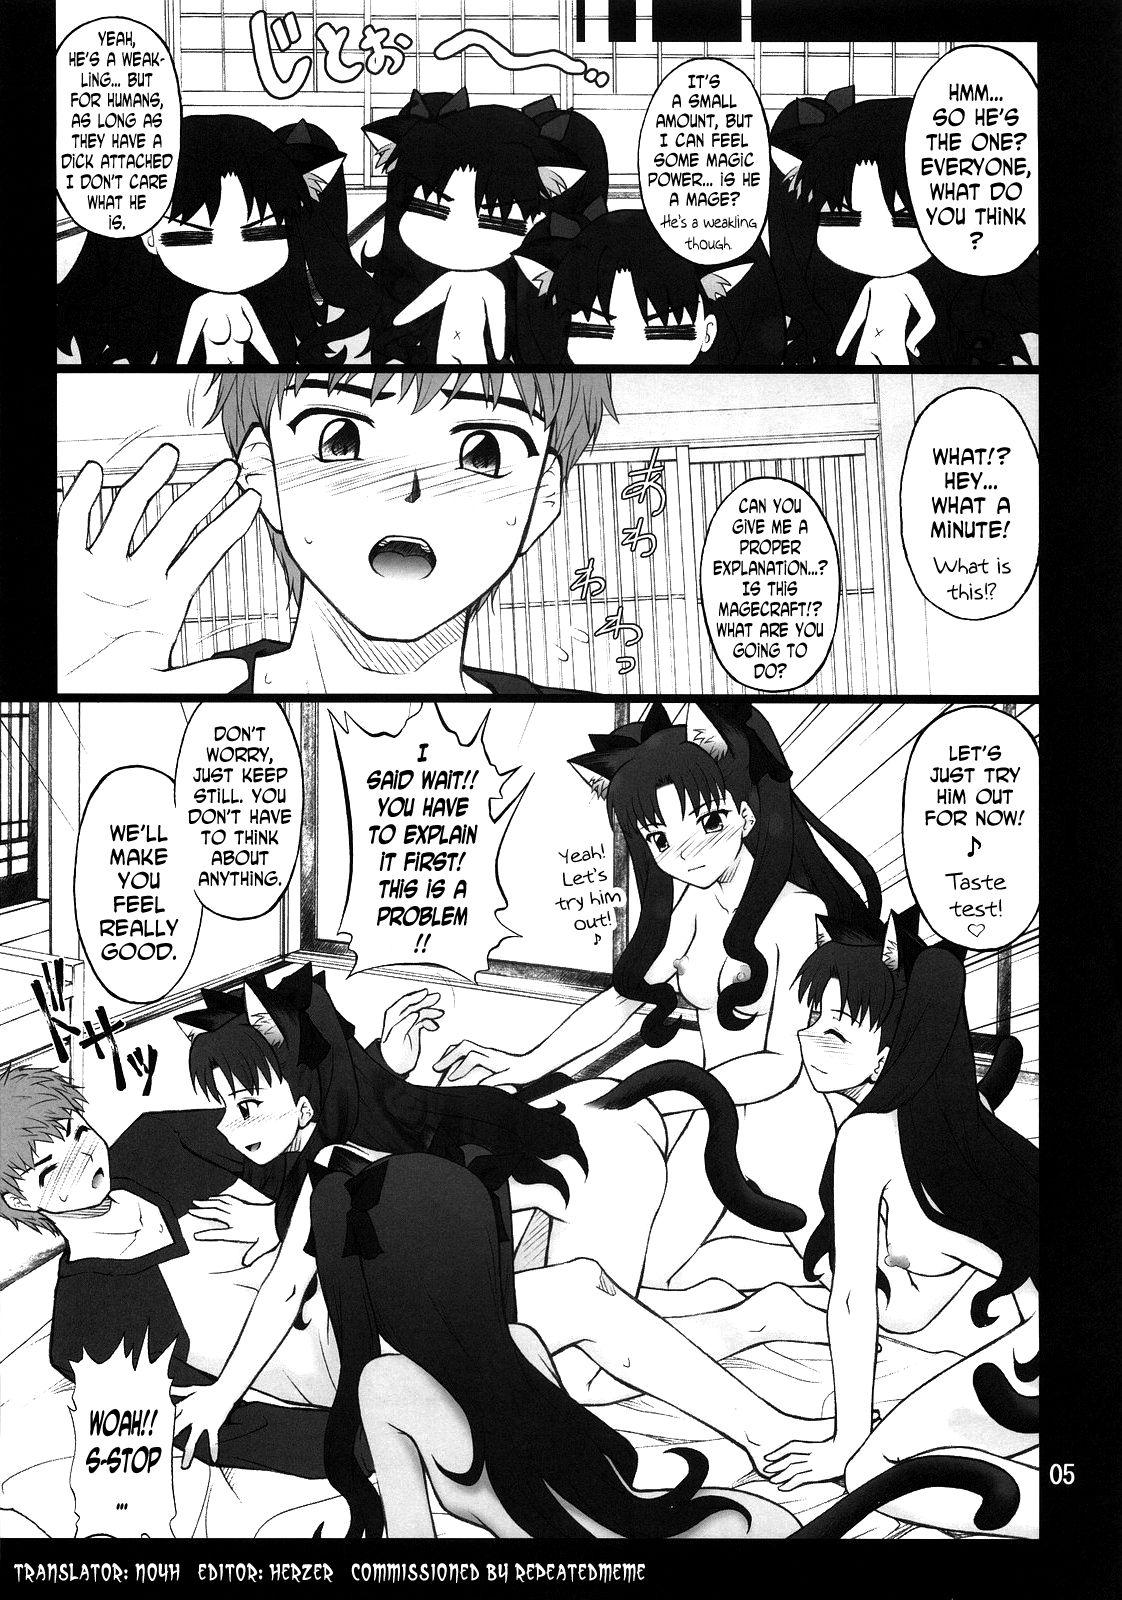 Best Blow Jobs Ever Grem-Rin 2 - Fate stay night Underwear - Page 4